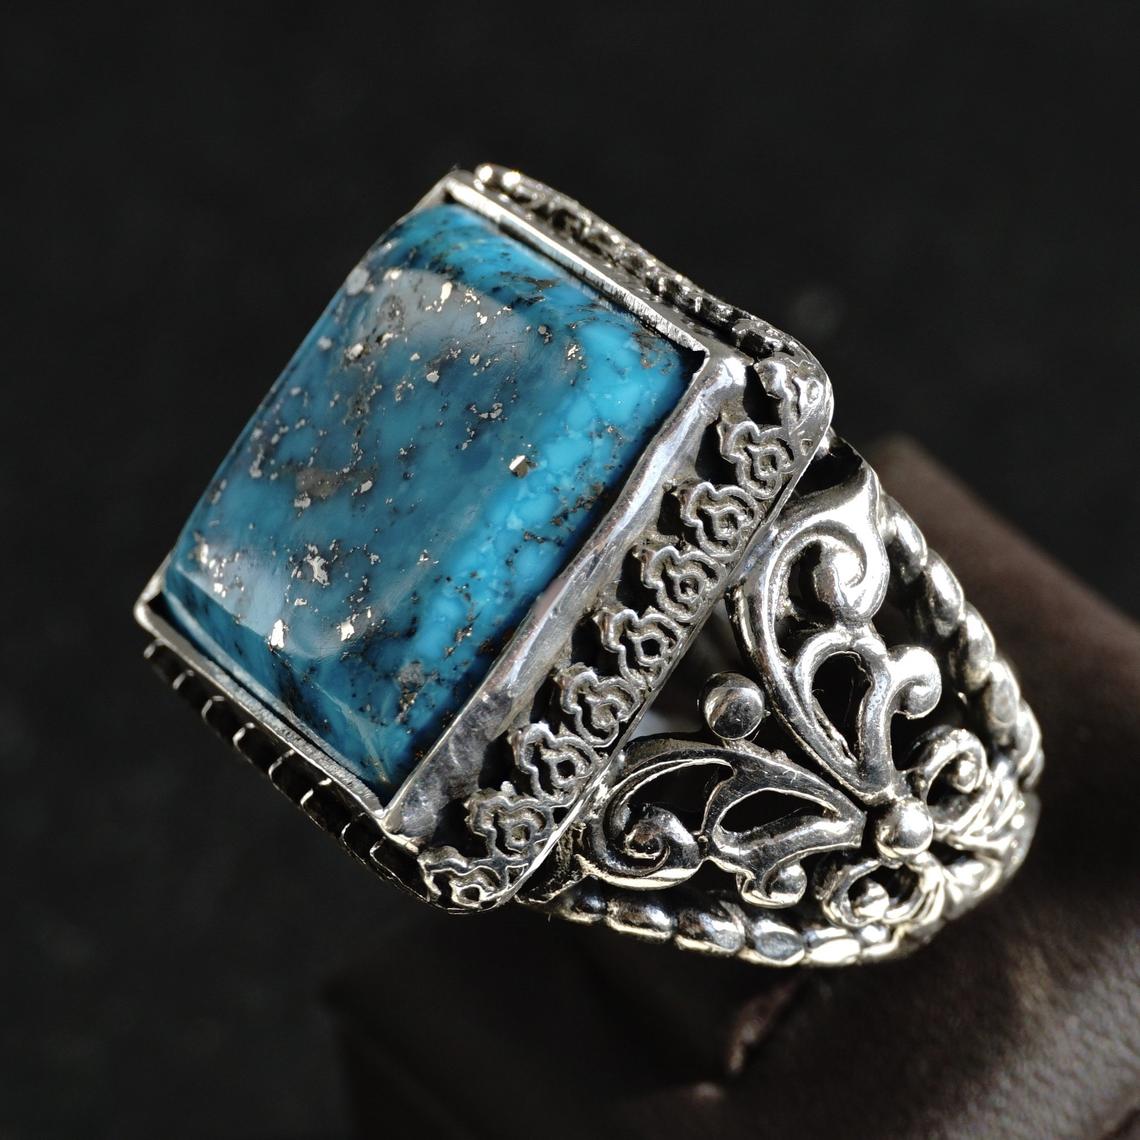 Turquoise Mens Ring Sterling Silver 925 Handmade Unique Artisan Jewelry